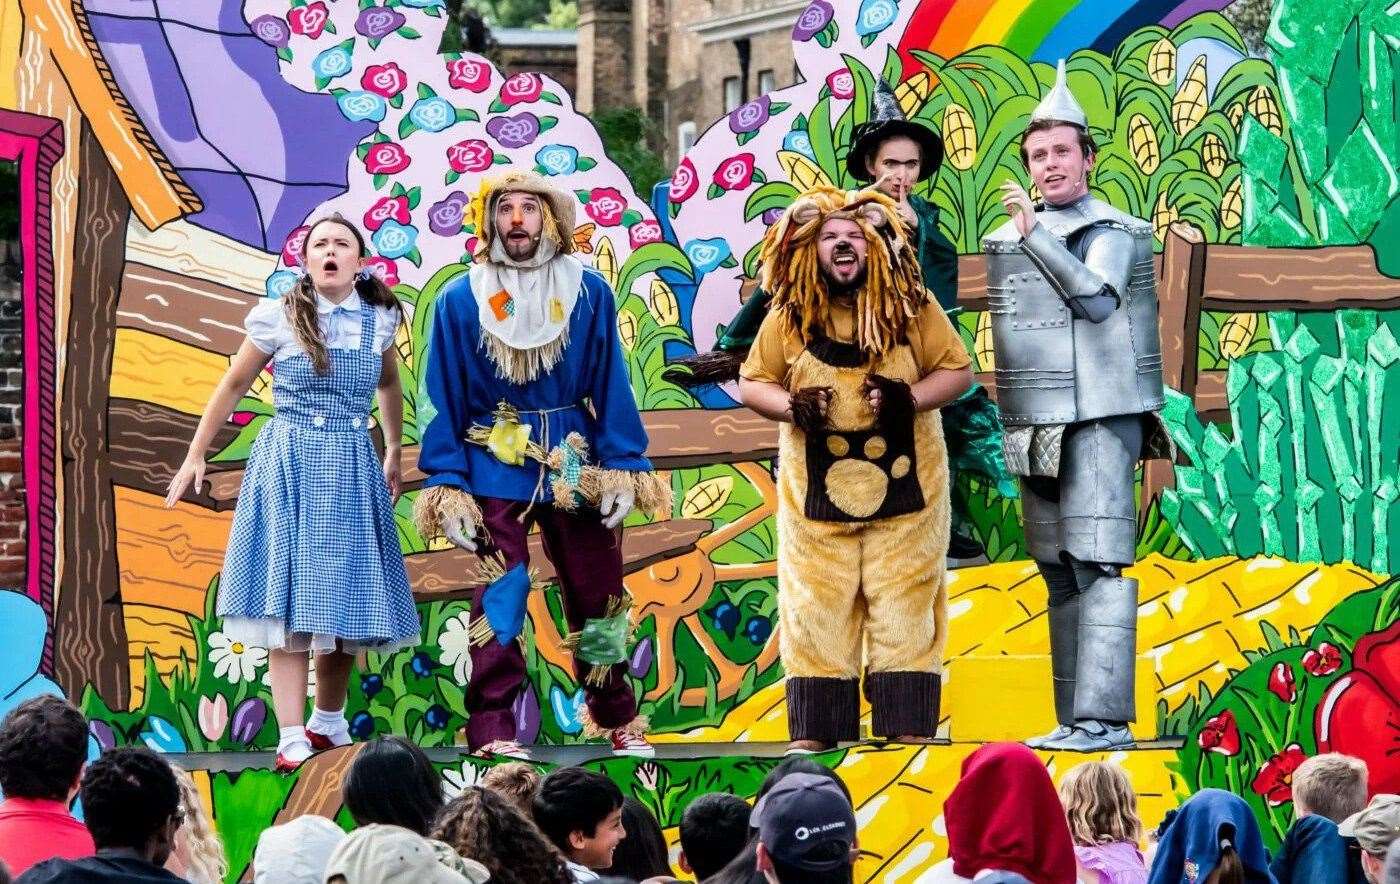 Immersion Theatre, who performed the Wizard of Oz at Leeds Castle last year, will be reimagining children’s classic Peter Pan later this year. Picture: Immersion Theatre